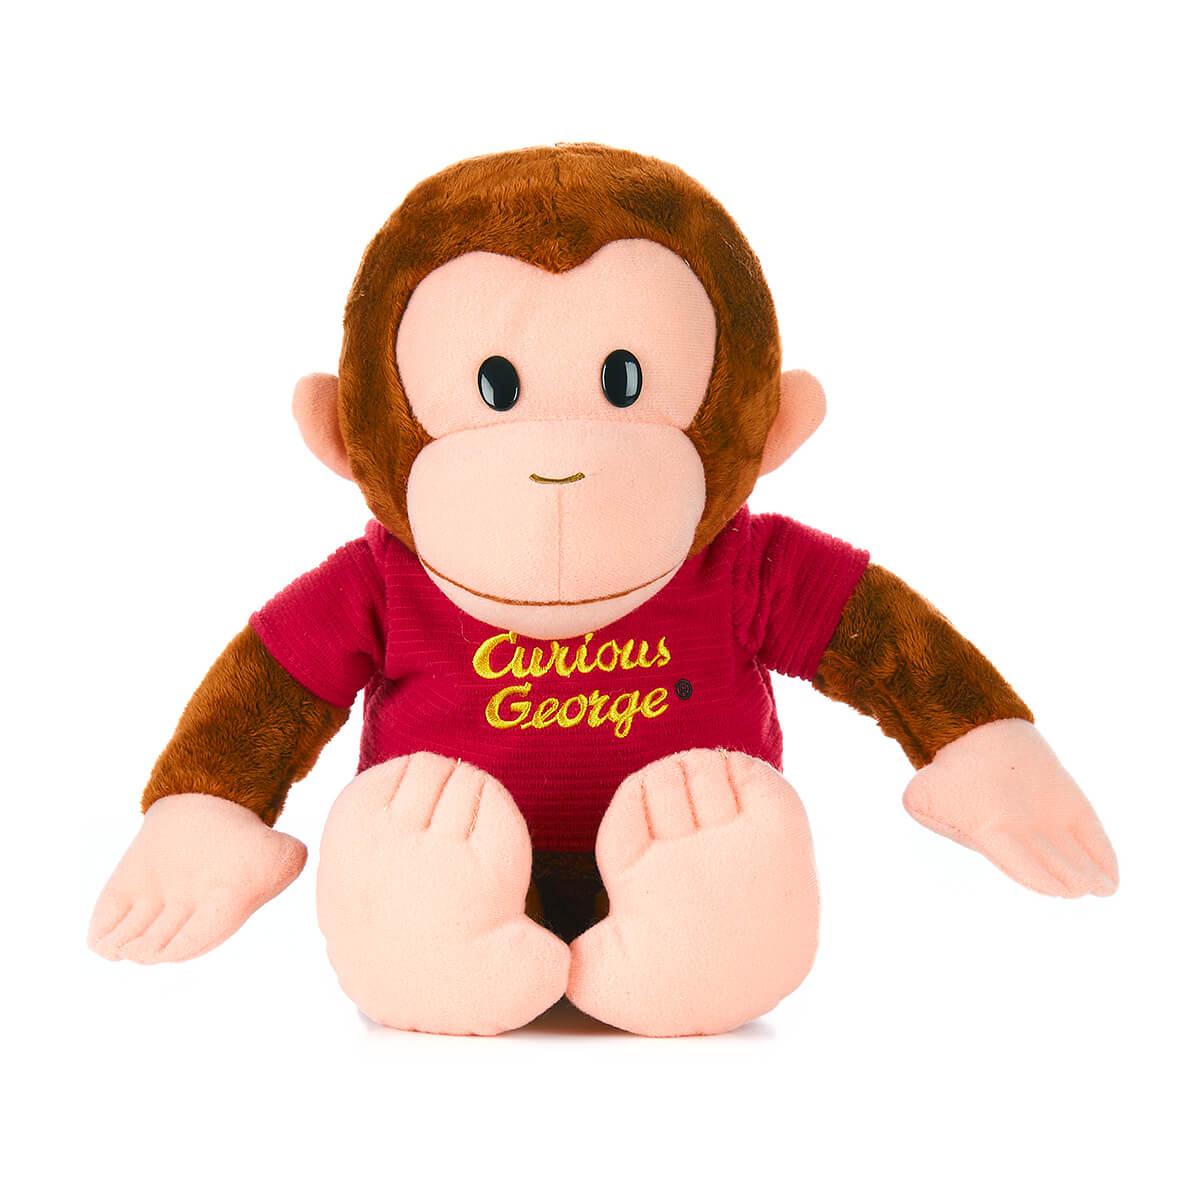  Curious George Plush Toy - 12 Inch